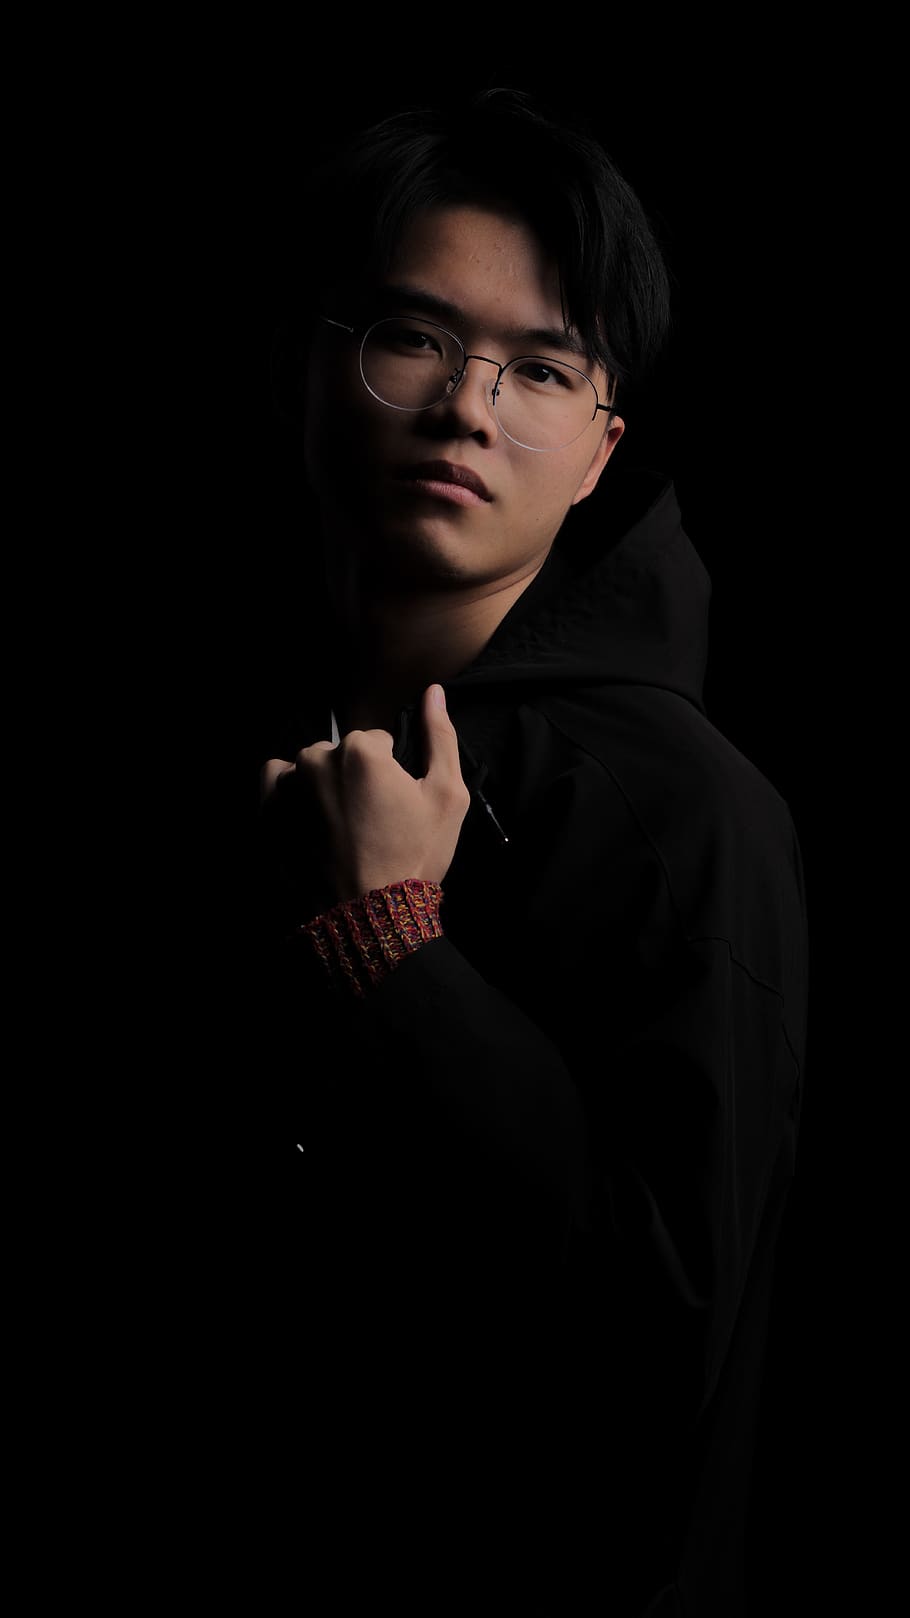 asia, man, portrait, winter, black, shadow, black background, one person, studio shot, young adult